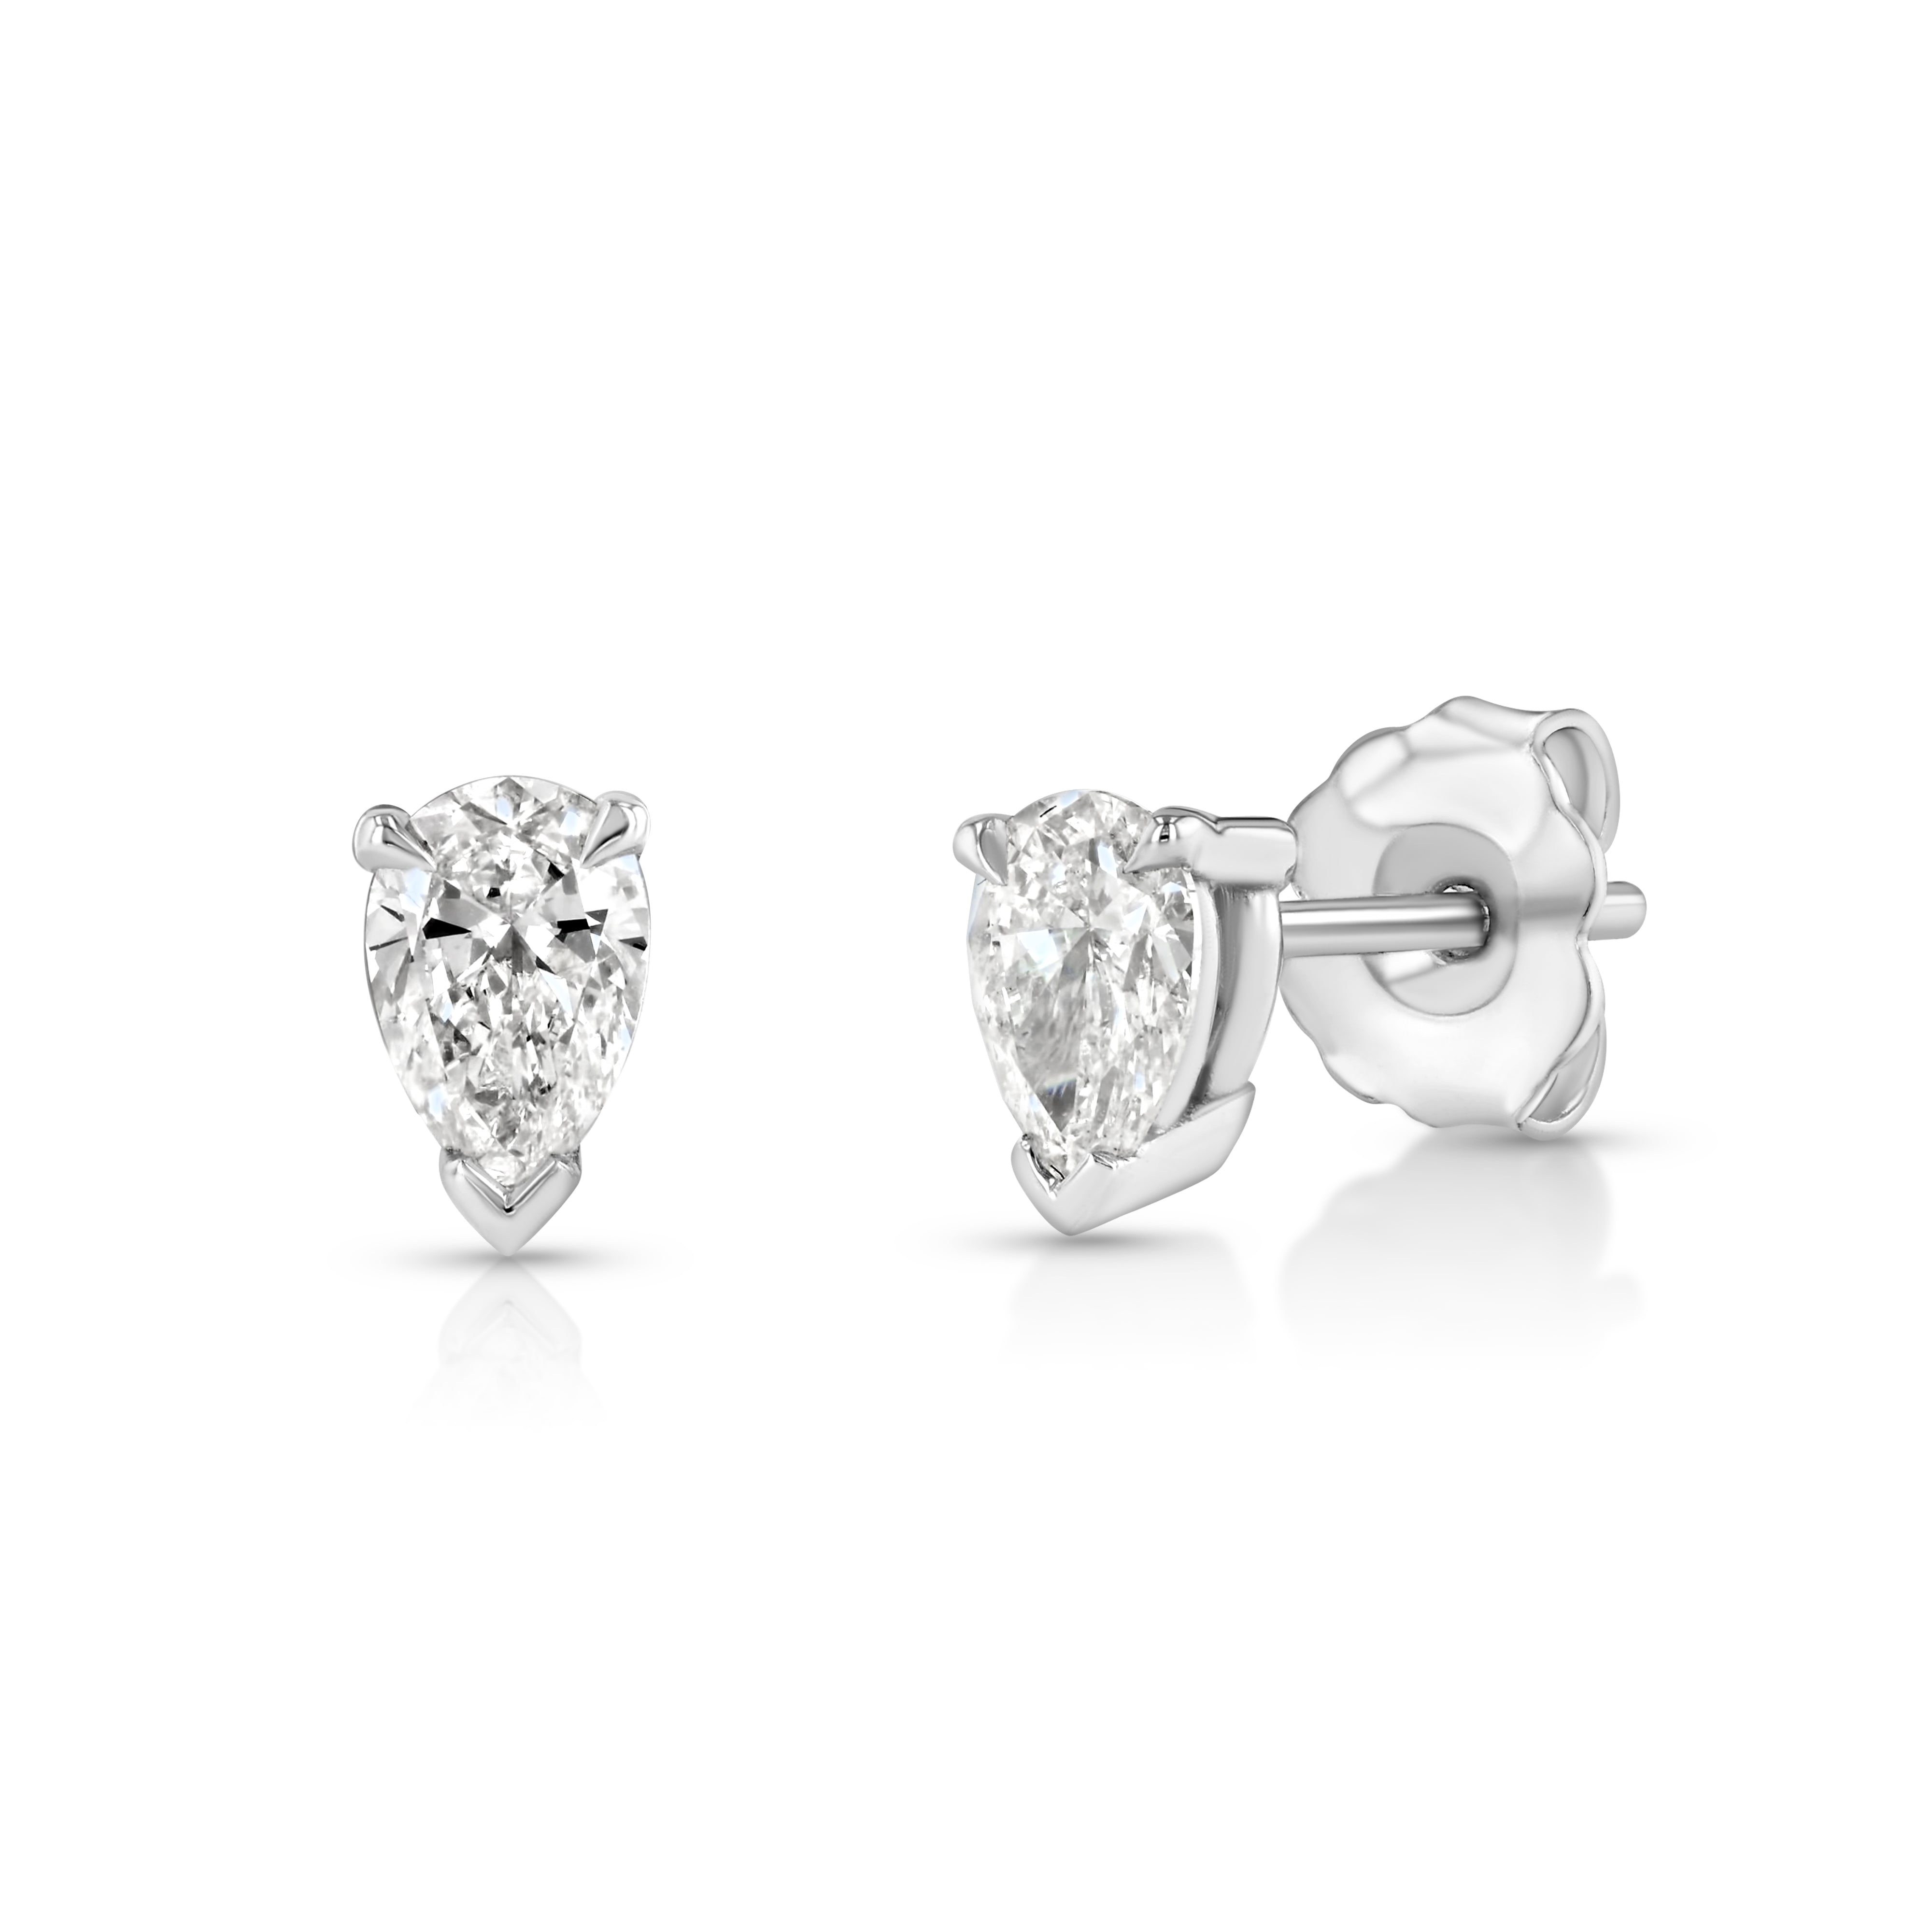 Sold at Auction: Pair of 14 kt gold diamond-earrings